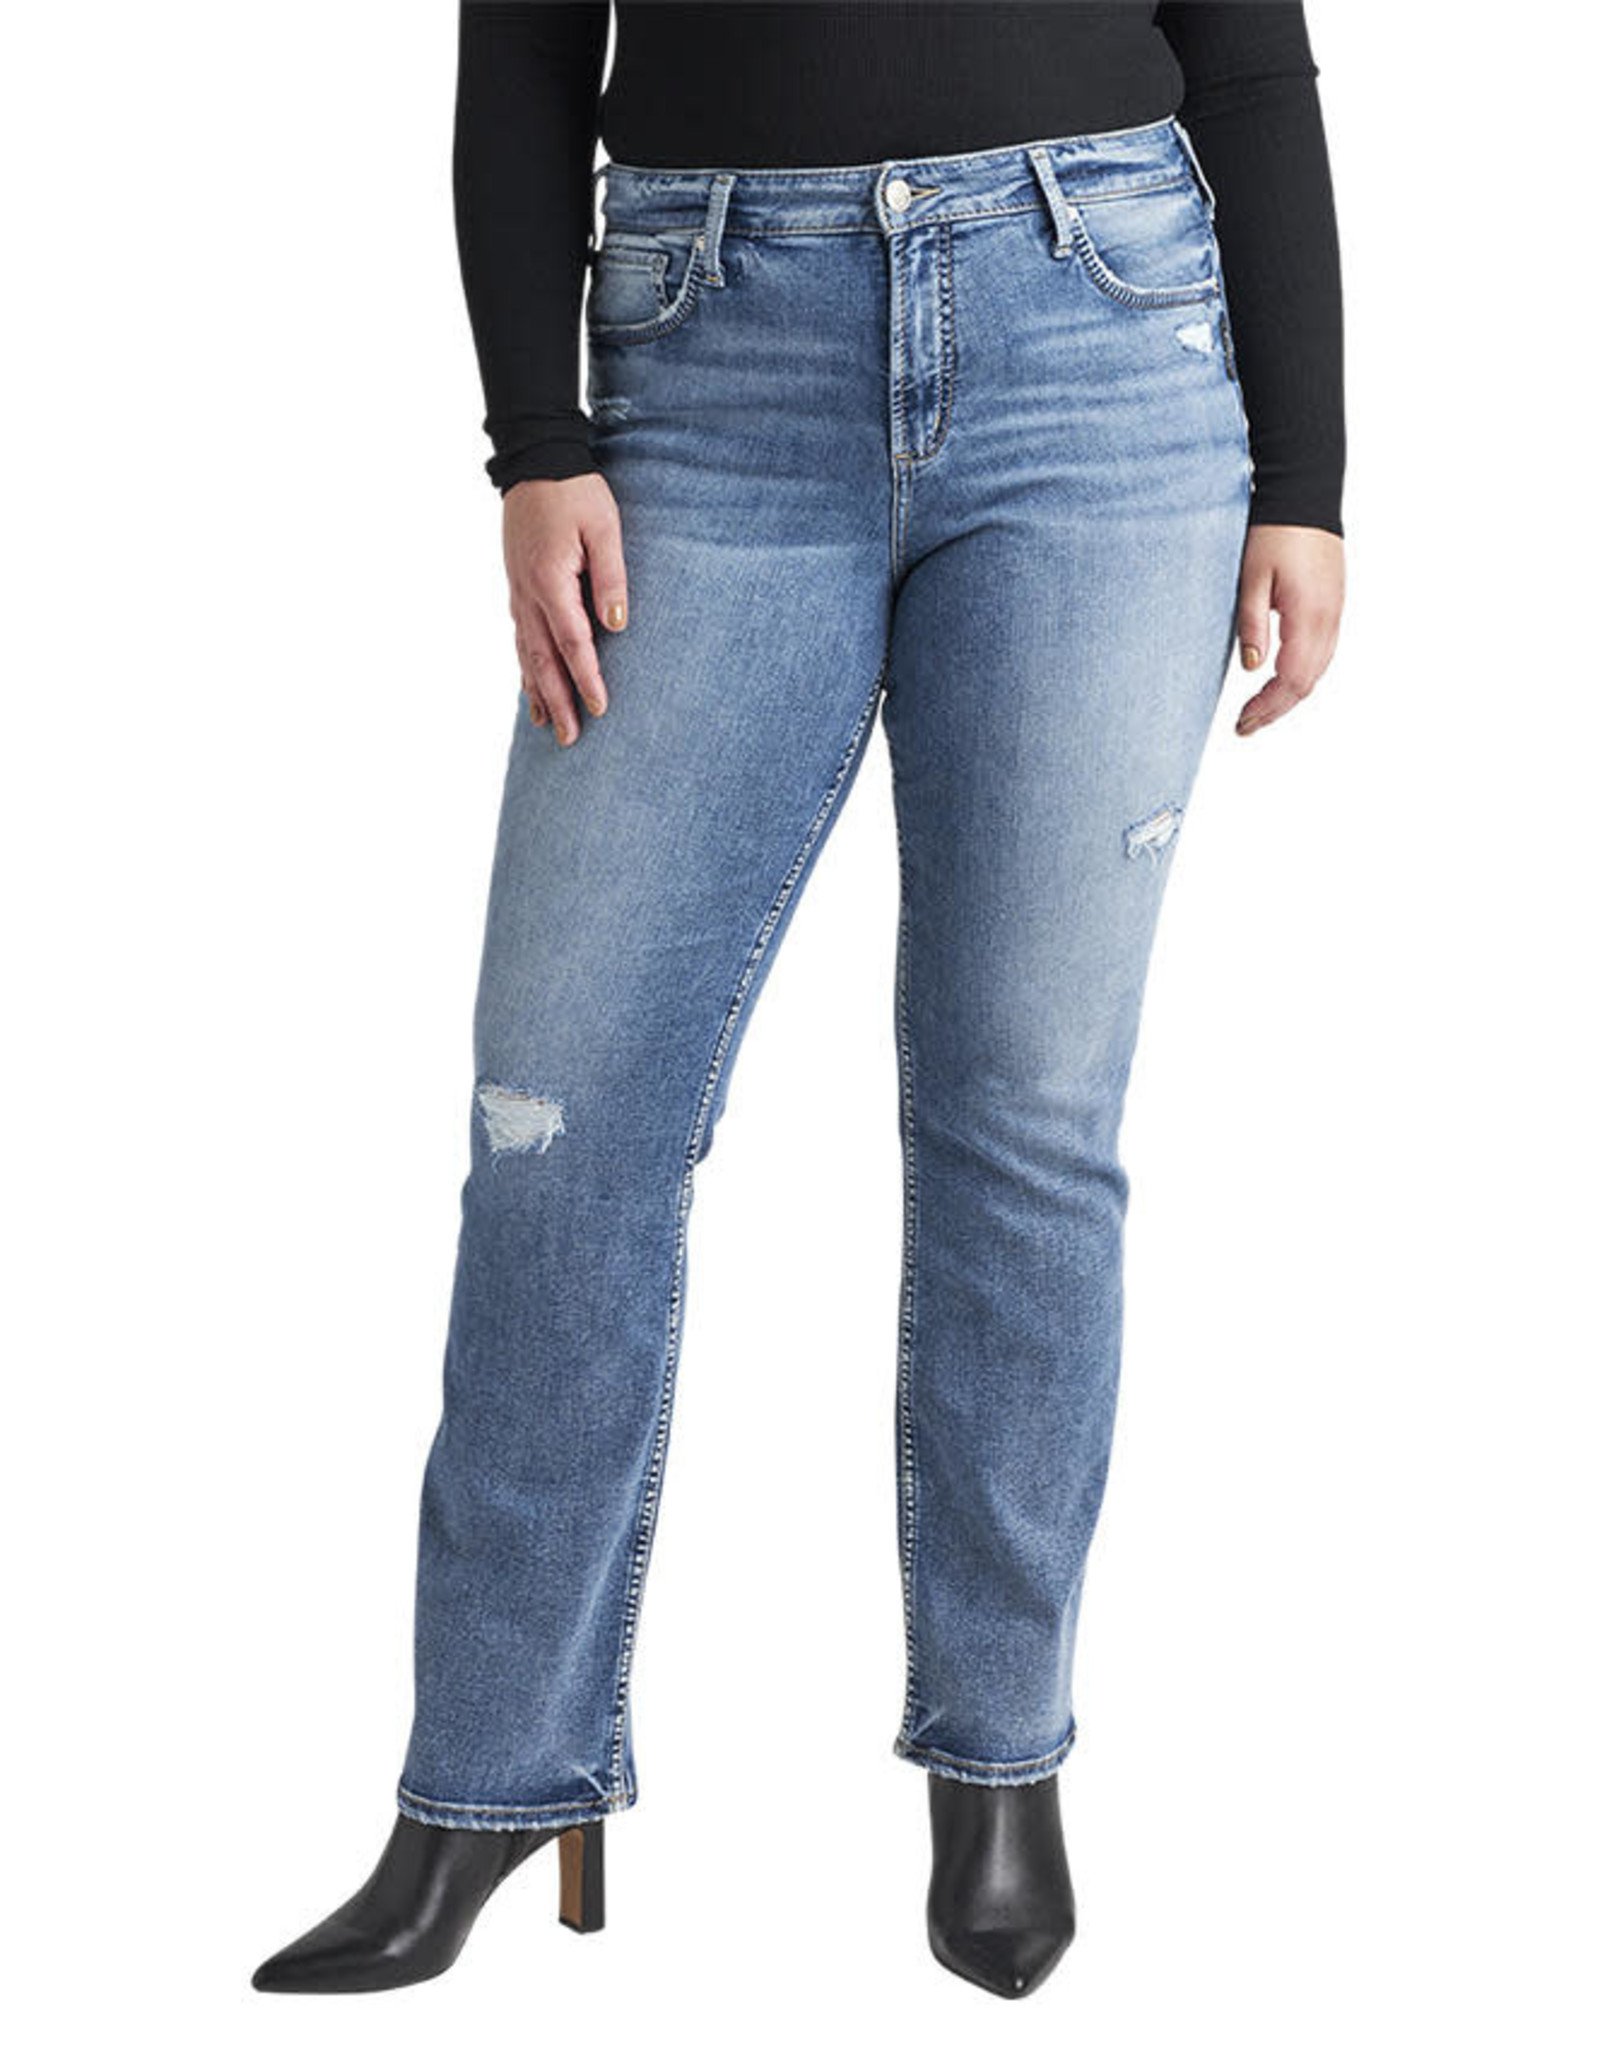 SILVER JEANS AVERY SLIM BOOT X263 33IN INSEAM